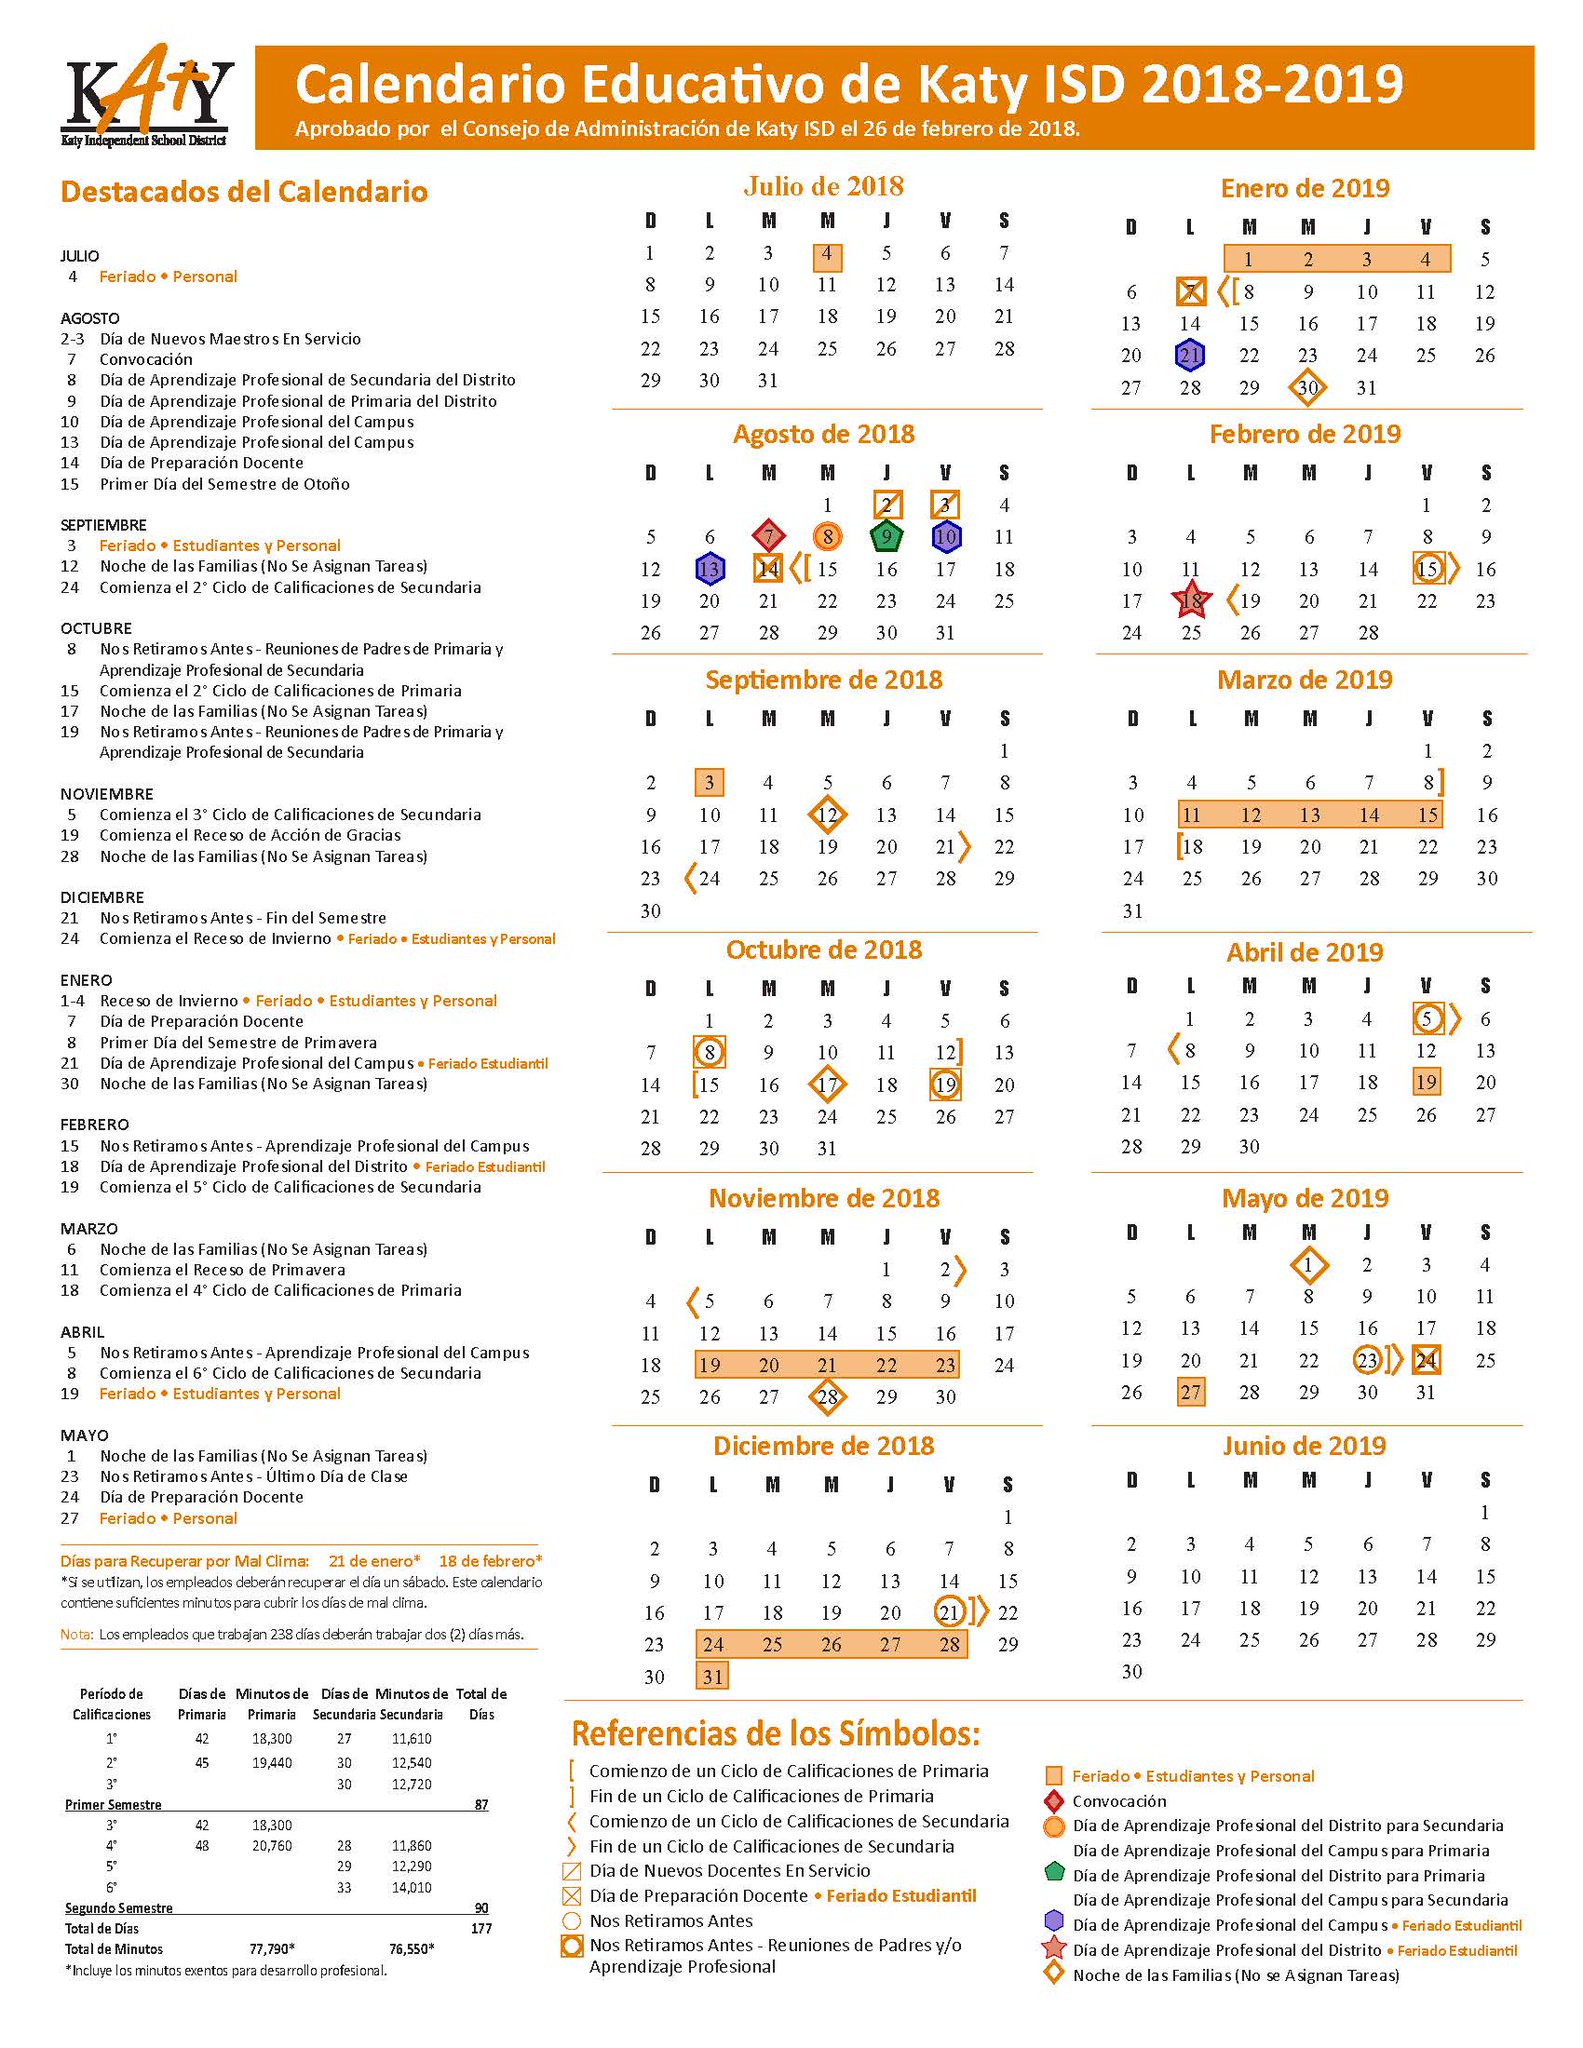 lausd-calendar-for-the-2023-24-school-year-key-dates-and-holidays-tutoring-4-less